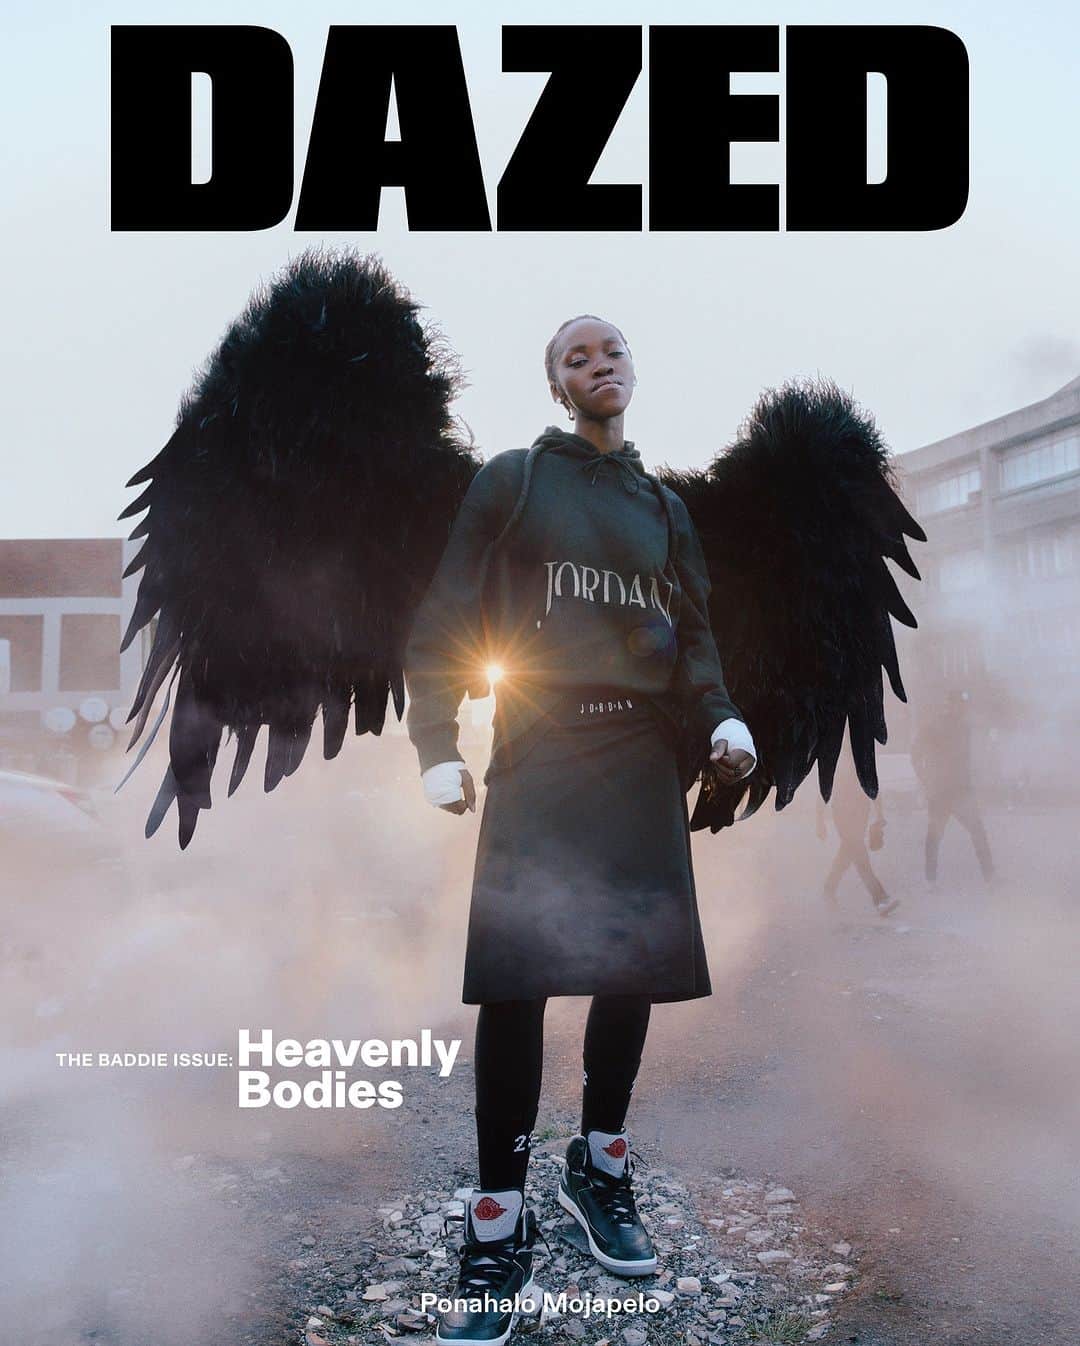 Dazed Magazineのインスタグラム：「Heavenly baddies 👼 Photographer @kristinleemoolman and stylist @zaraeloise get weightless for the fourth cover of the Baddie issue, transporting us into their ethereal dimension 💫⁠ ⁠ Tap the link in bio to explore more of the cover story 🔗⁠ ⁠ Photography @kristinleemoolman⁠ Styling @zaraeloise⁠ Hair @urban_mimz, @zwannepoel⁠ Make-up @johanni_creative⁠ Production @lampostproduction⁠ Casting @lampostcreative⁠ Featuring @ponahalo, @denetric_malope, @lebuhang_ndlovu, @domz.evans, @lebohomme, @tamaramoeng, your_average_weasley, @cameron.drotsky, and Macs Mcdougall⁠ ⁠ Editor-in-Chief @ibkamara⁠ Art Director @gareth_wrighton⁠ Editorial Director @kaci0n⁠ Fashion Director @imruh⁠ ⁠ Ponahola wears all clothes, socks and leather trainers @jumpman23, custom-made faux feathers and foam wings stylist’s own. ⁠ ⁠ Taken from the winter 2023 #THEBADDIEISSUE of #Dazed」